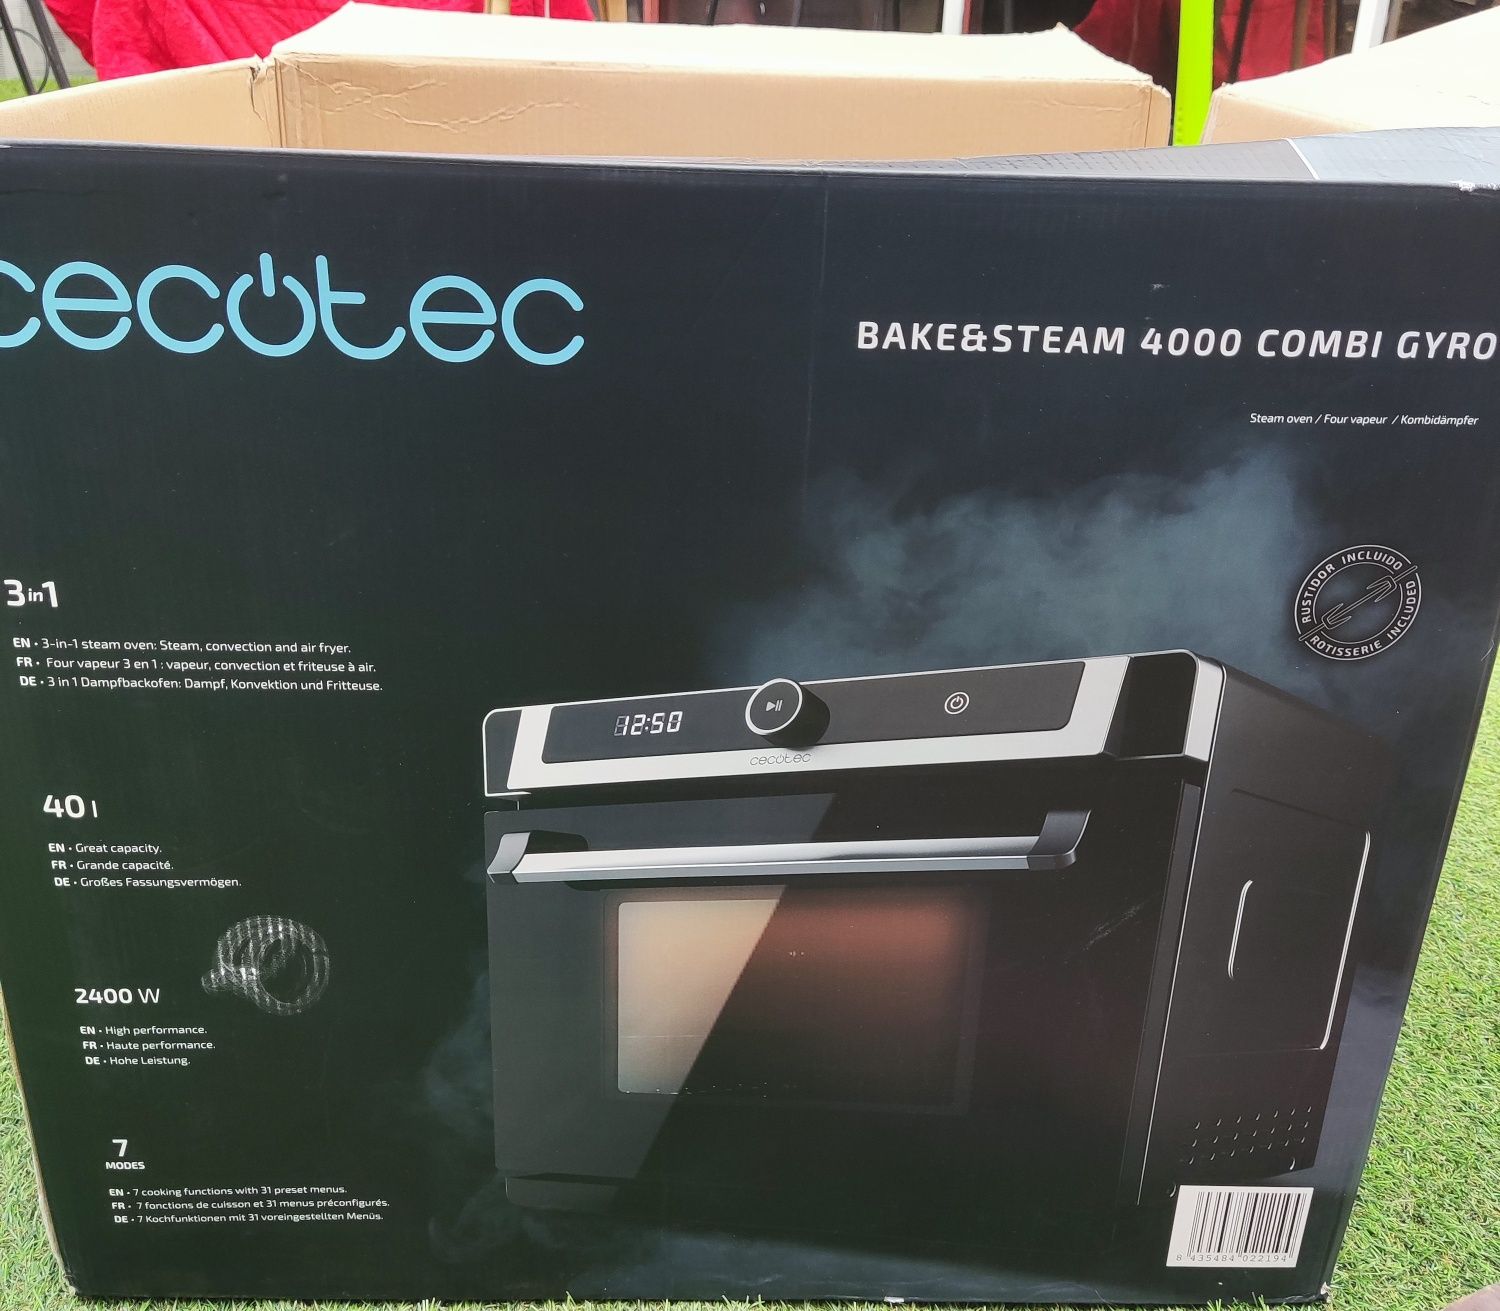 Cecotec bake and steam 4000 combi gyro